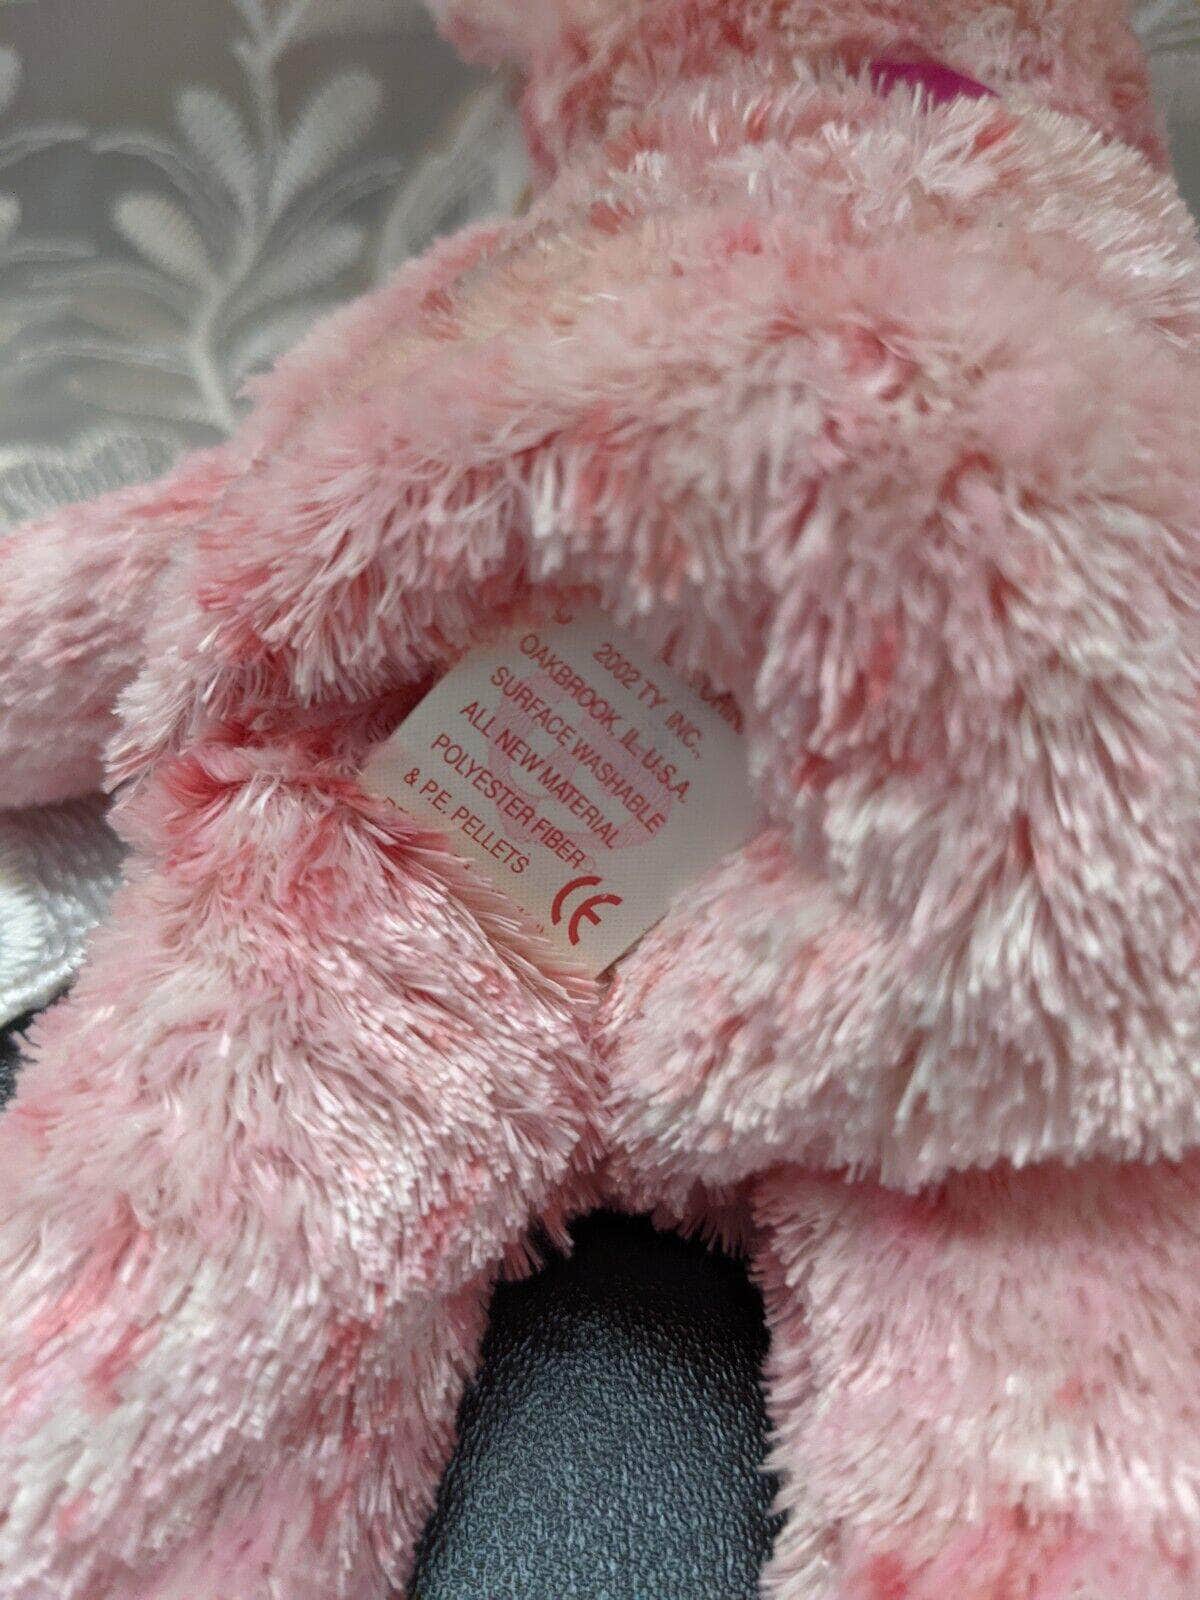 Ty Beanie Baby - Smitten Pink Bear (8.5in) Black Nose - Vintage Beanies Canada